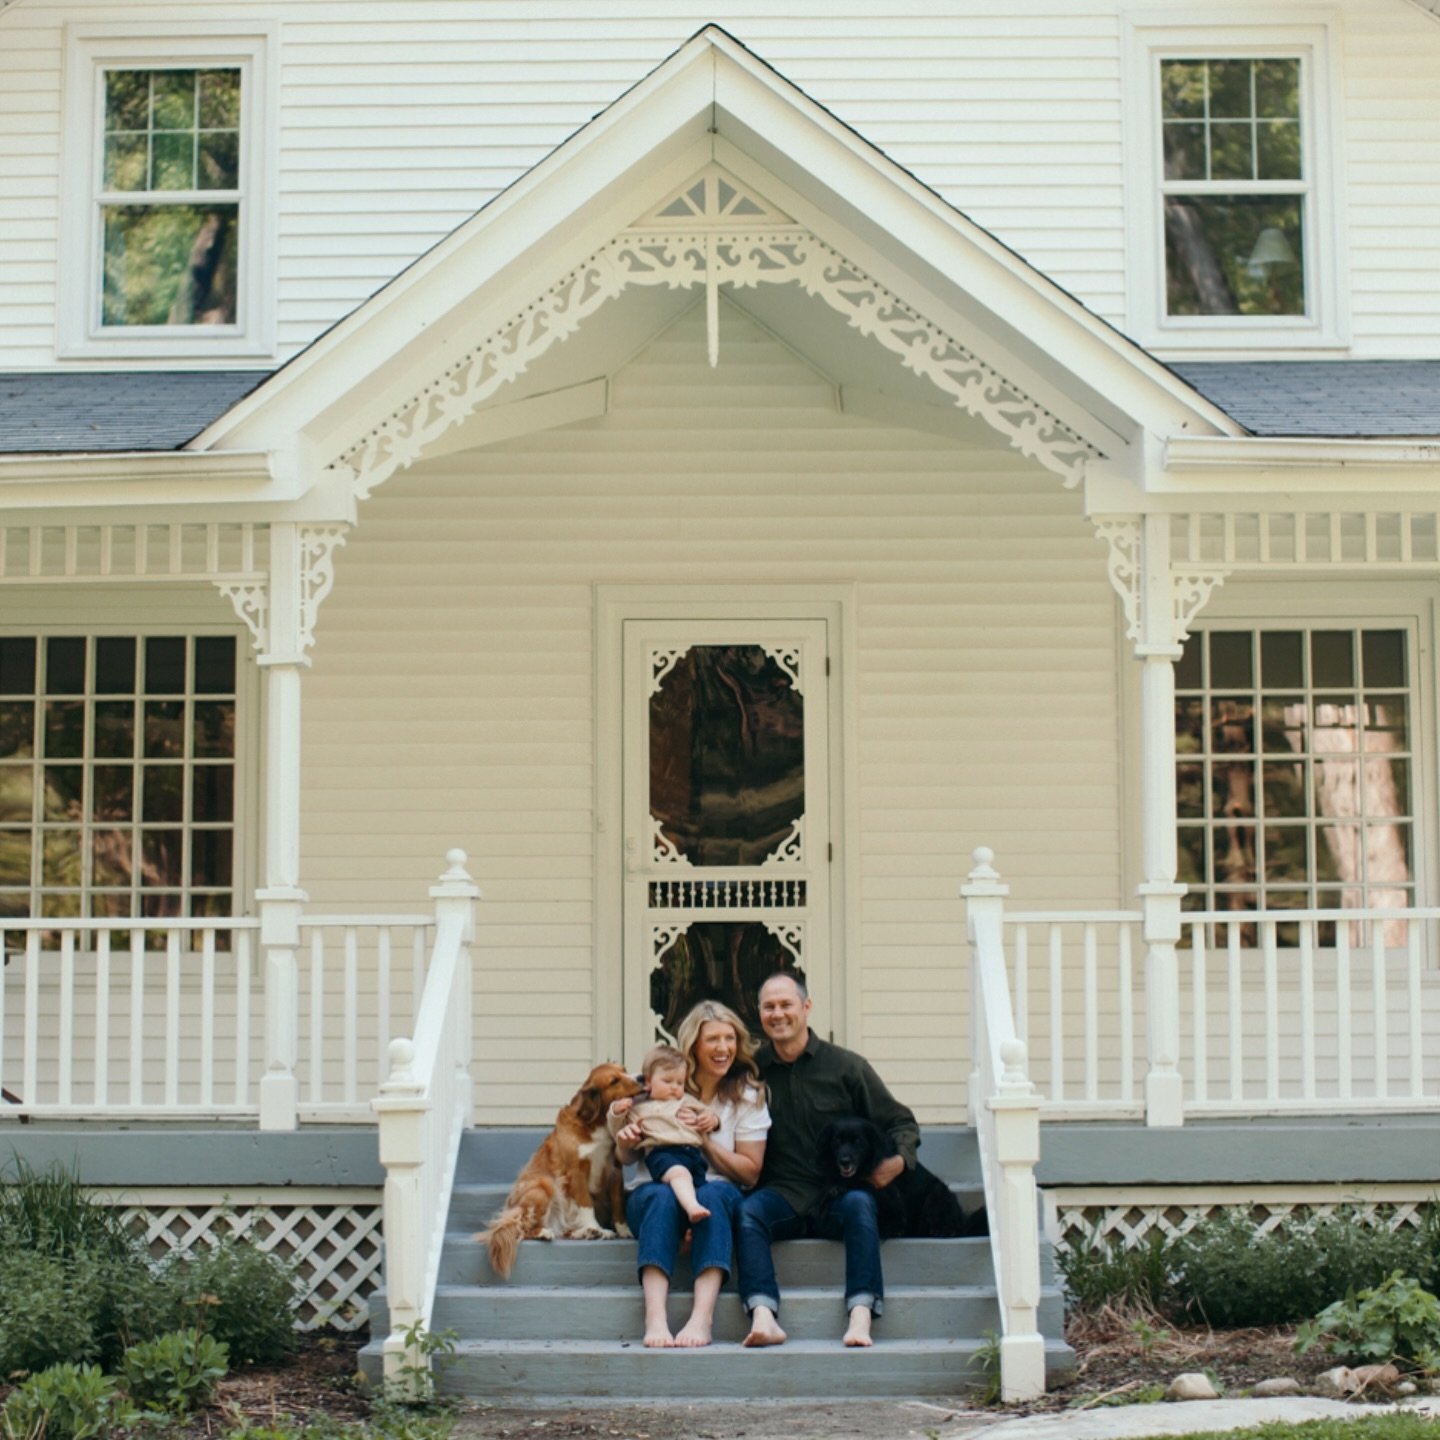 &ldquo;Home is what you take with you, not what you leave behind.&rdquo; &mdash; &bull;  N.K. Jemisin, 

Did this sweet family shoot on the eve of chels, andy, henry and the pups moving out of their first home together. Magical and emotional.